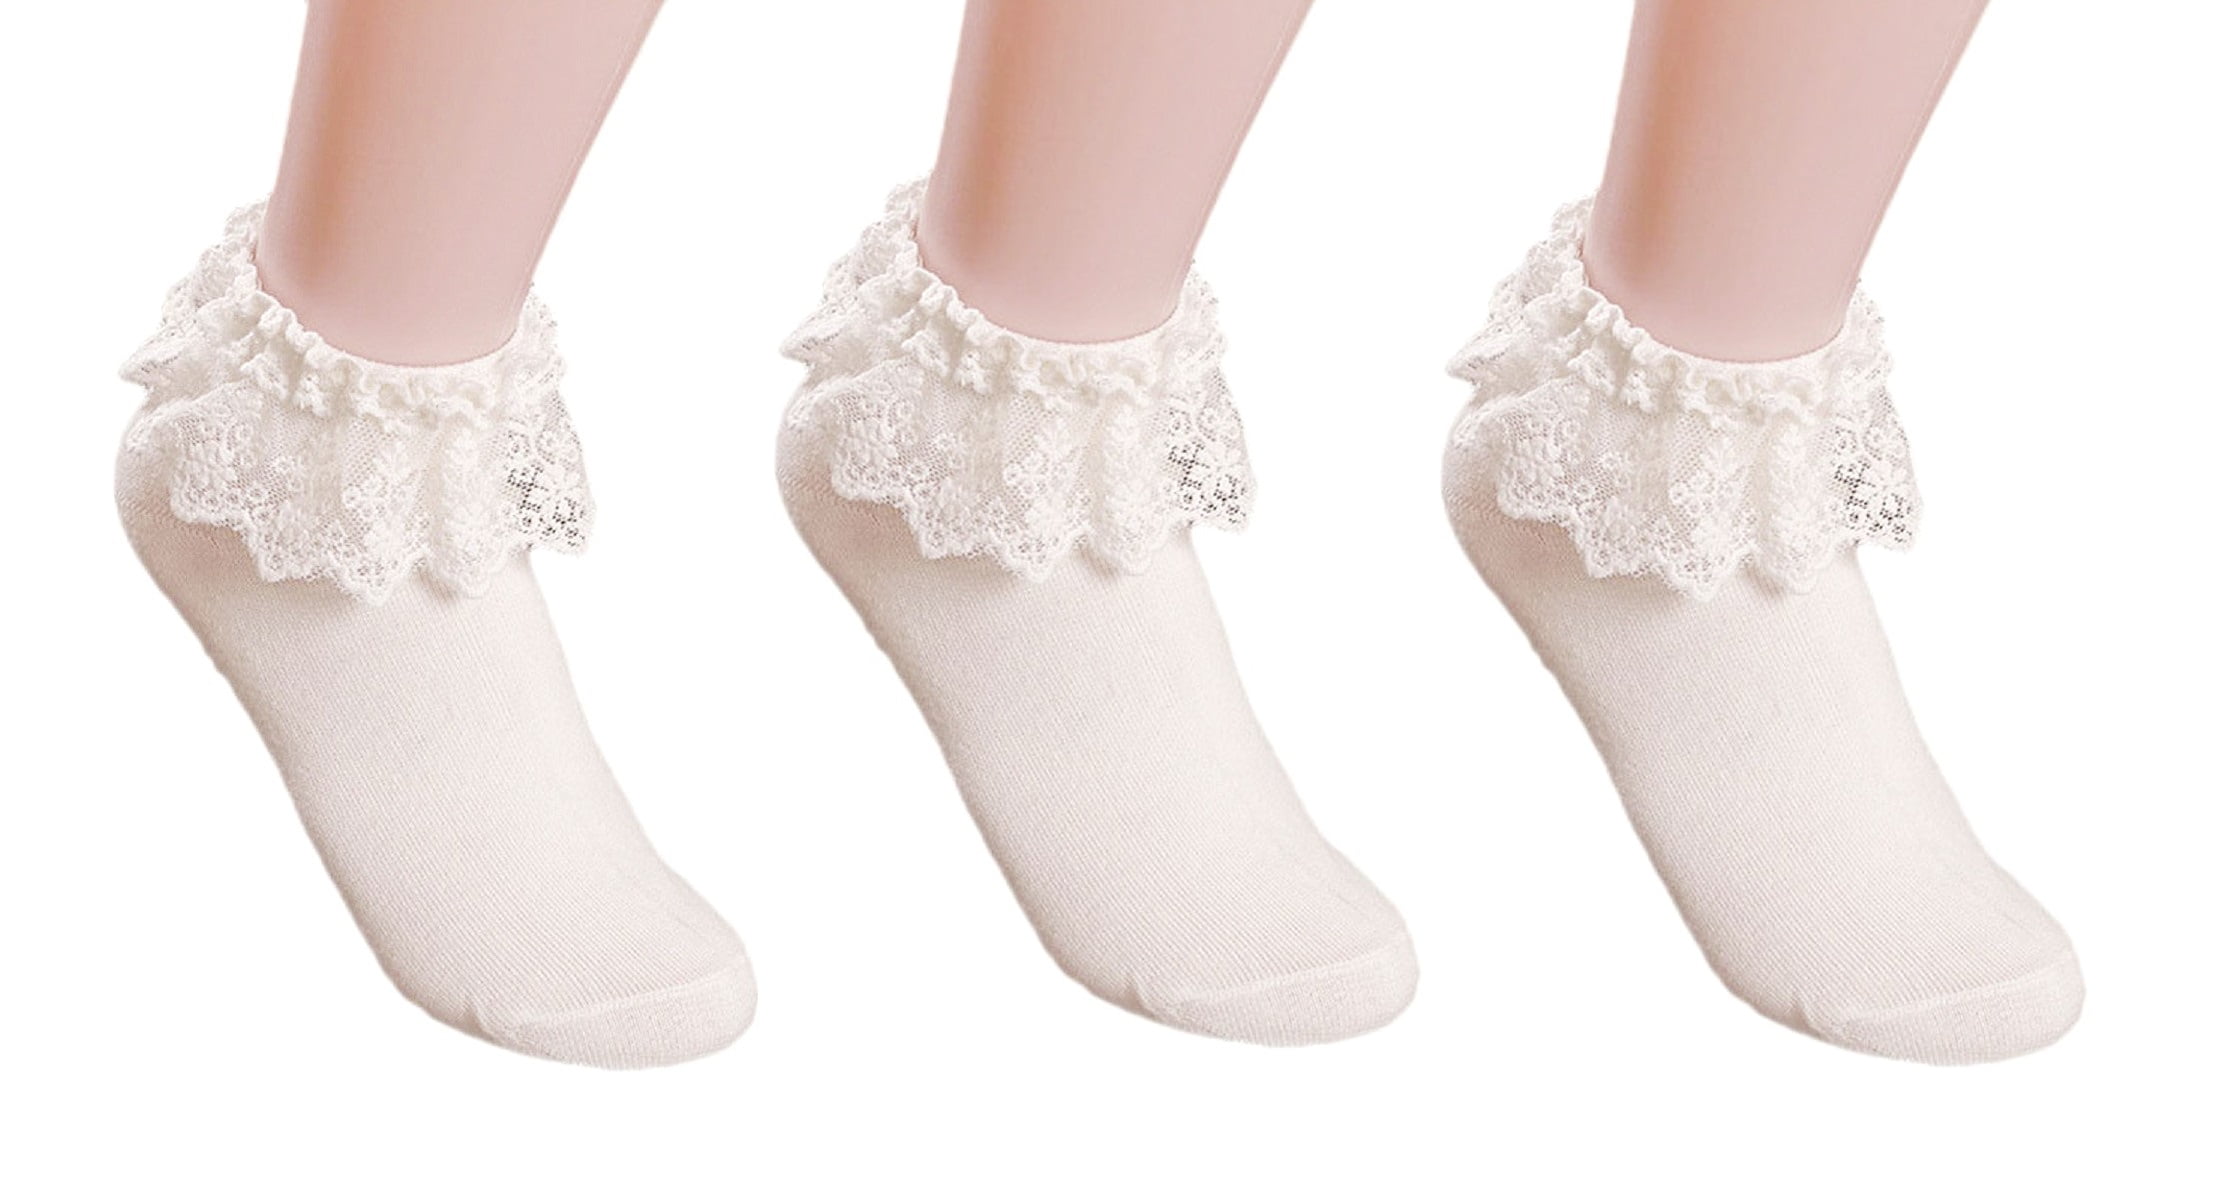 6 PAIR of GIRLS WHITE TURN OVER TOP ANKLE SOCKS Frilly Lace Trims 